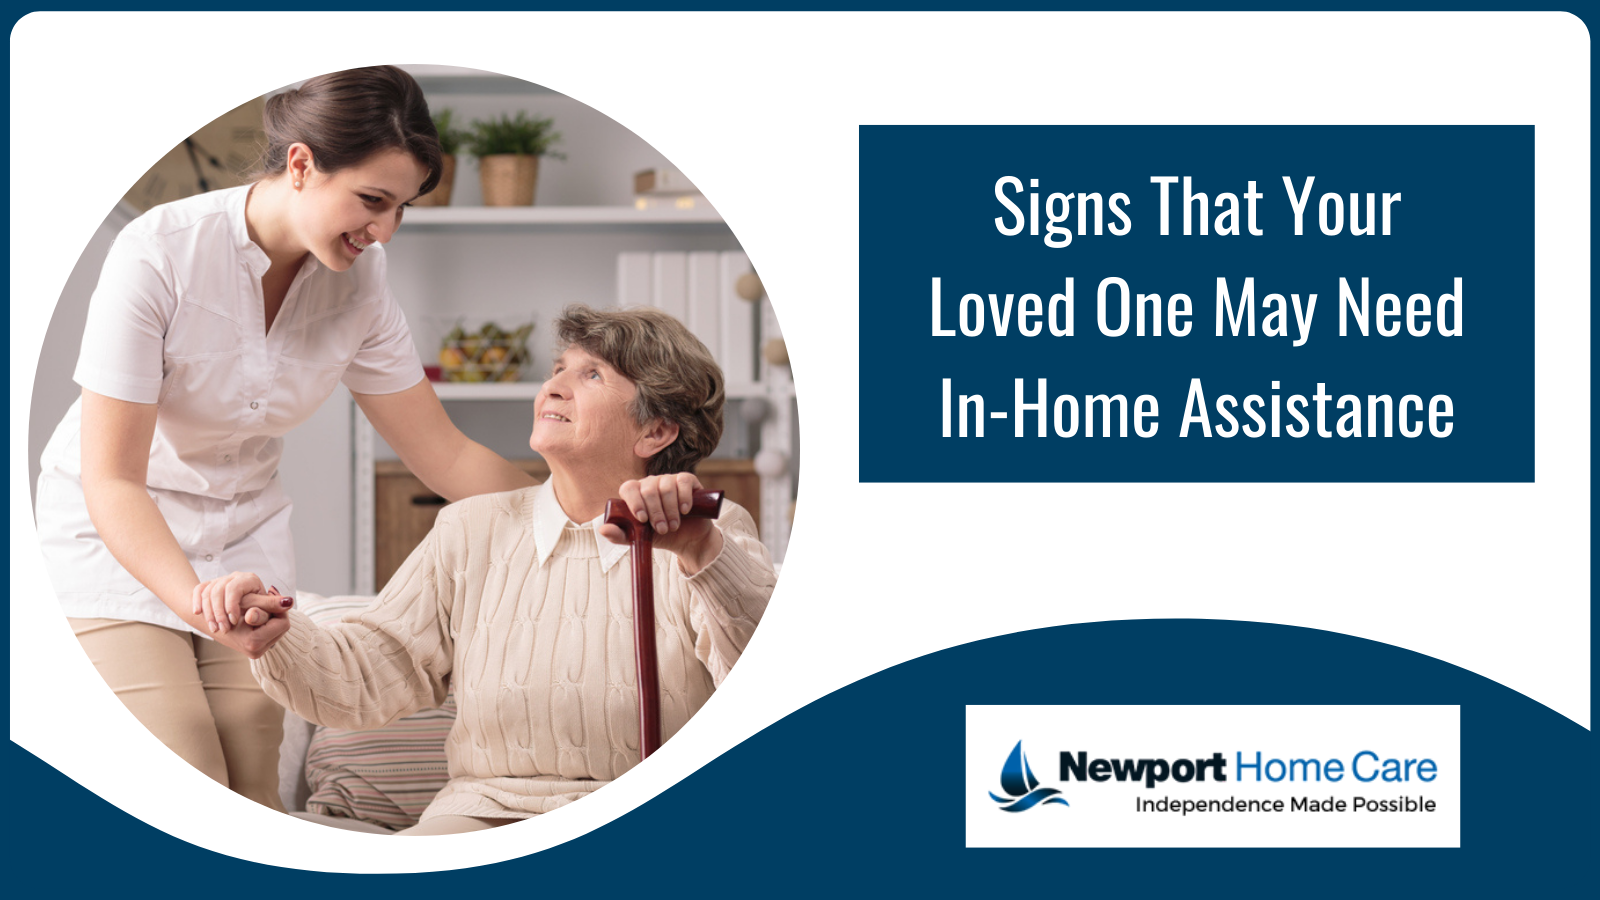 Signs That Your Loved One May Need In-Home Assistance